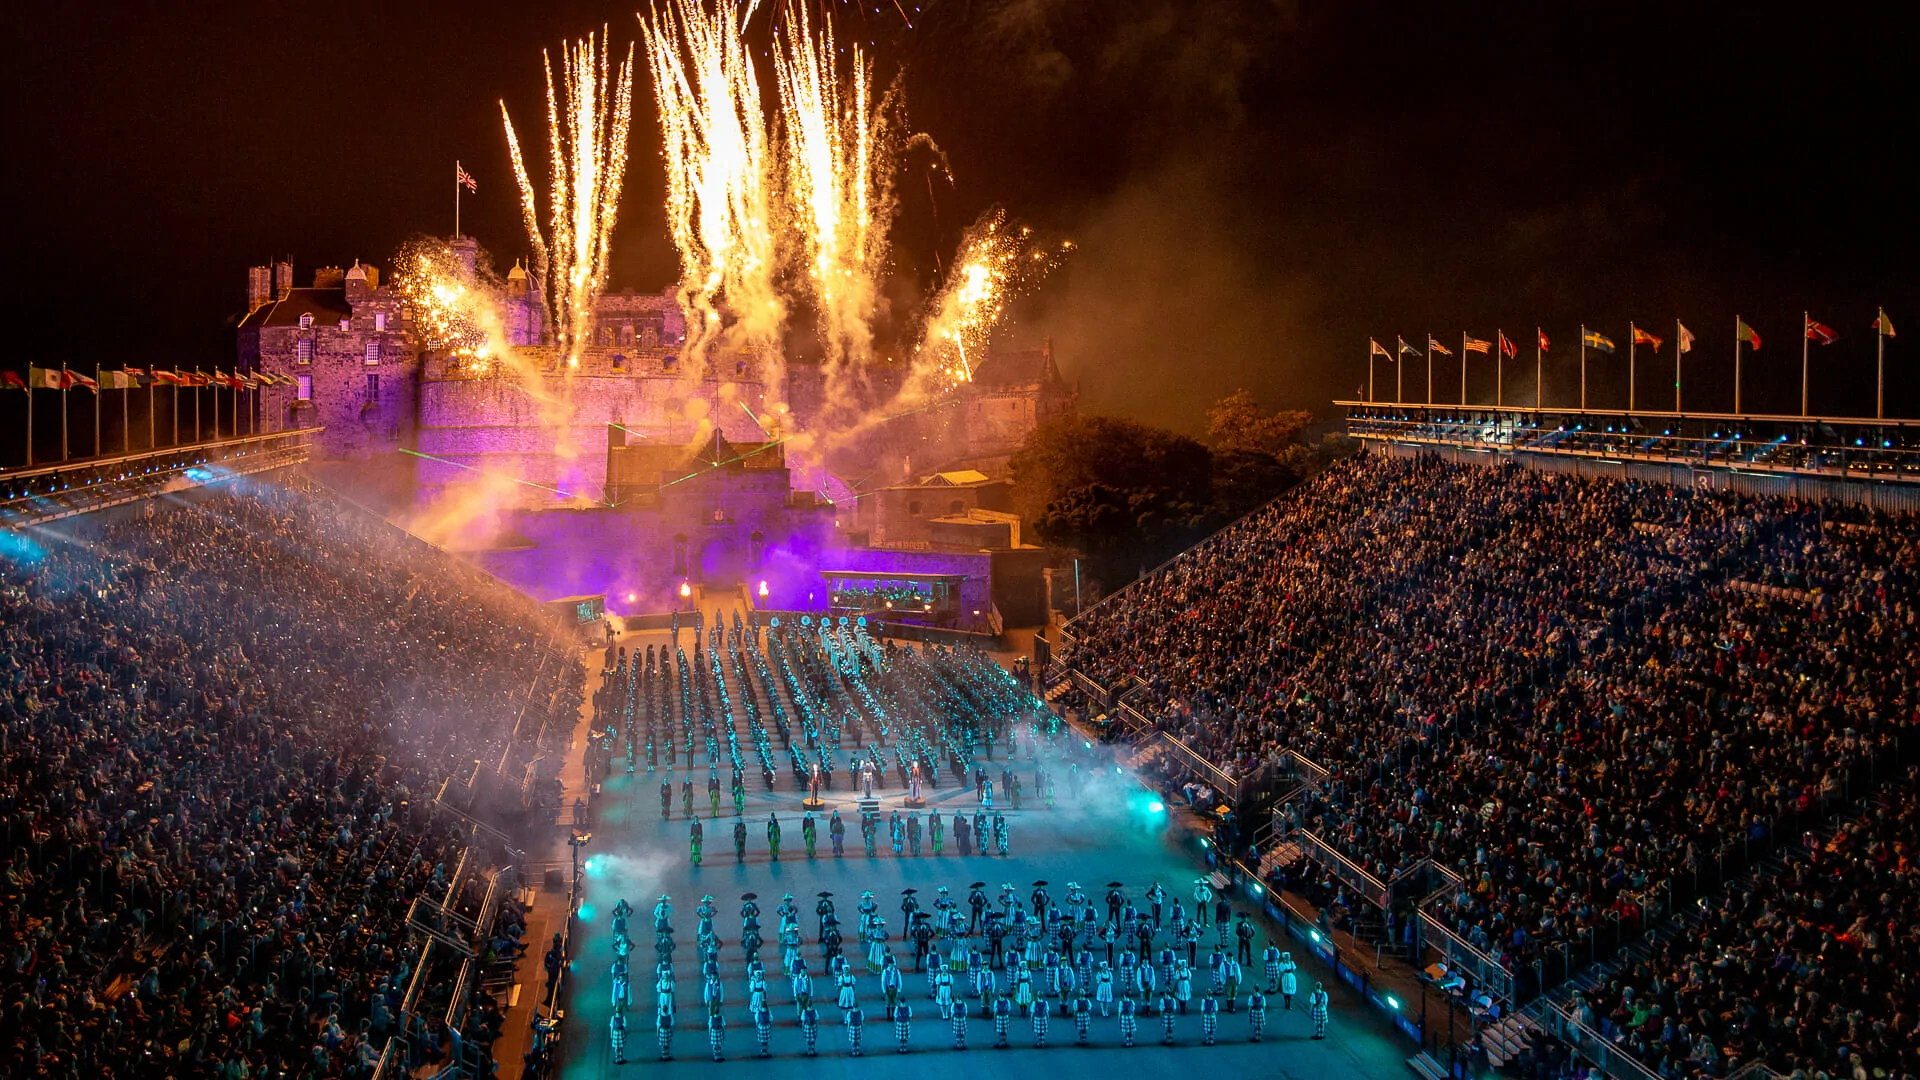 Best Edinburgh Military Tattoo Royalty-Free Images, Stock Photos & Pictures  | Shutterstock